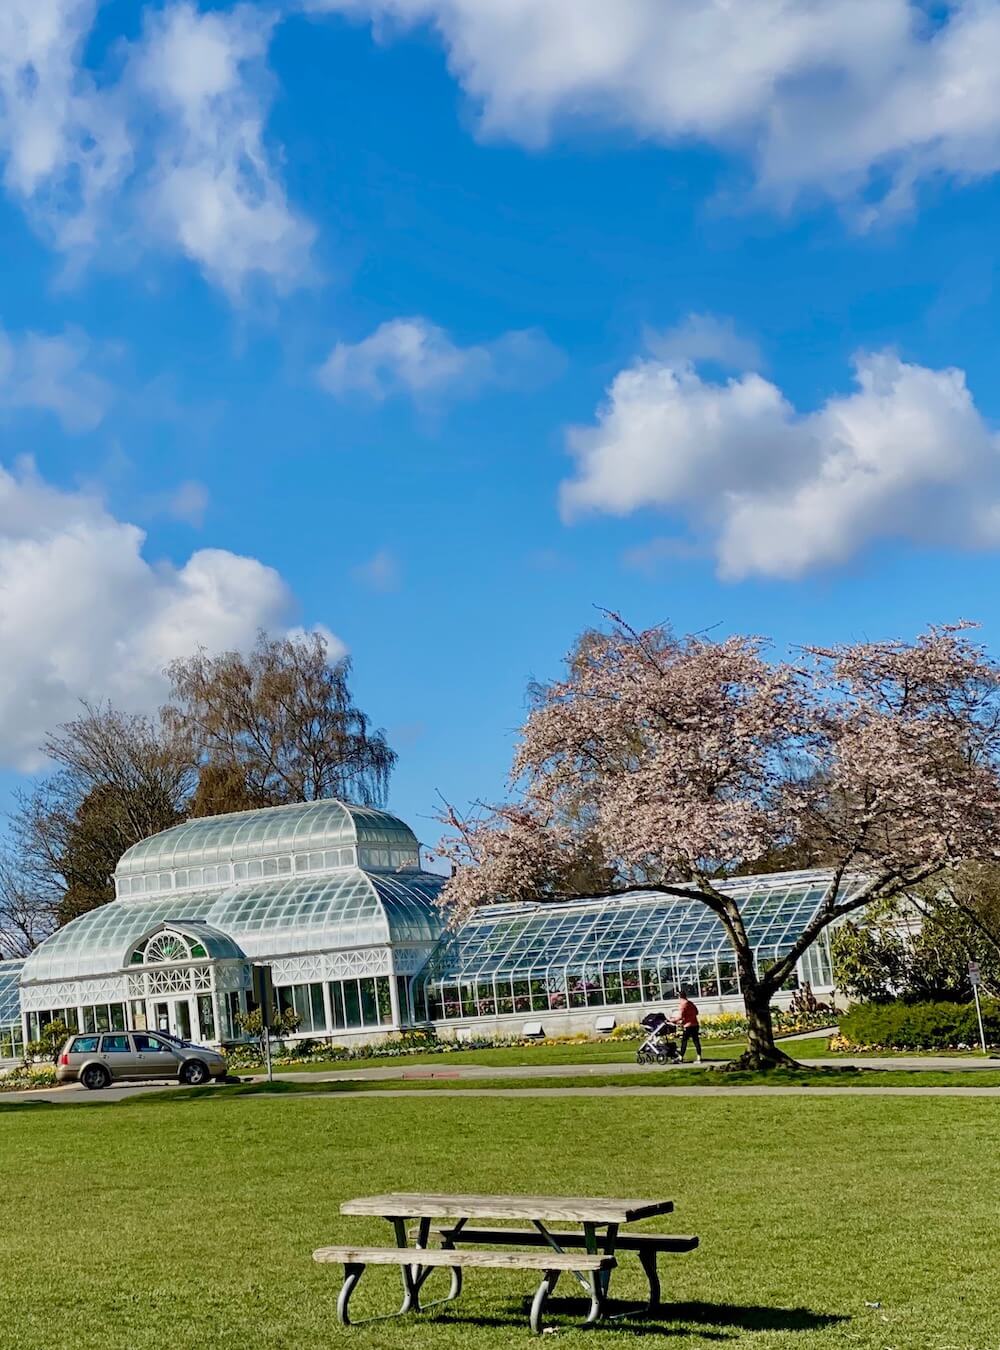 Volunteer Park is abuzz with pink cherry blossoms opening up to the world in front of the Volunteer Park Conservatory, with it's combination of white metal frames and glass panels.  The sky is blue with swirls of colds and there sits an empty picnic table in the foreground on one of the sweeping lawns in this iconic Seattle park. 